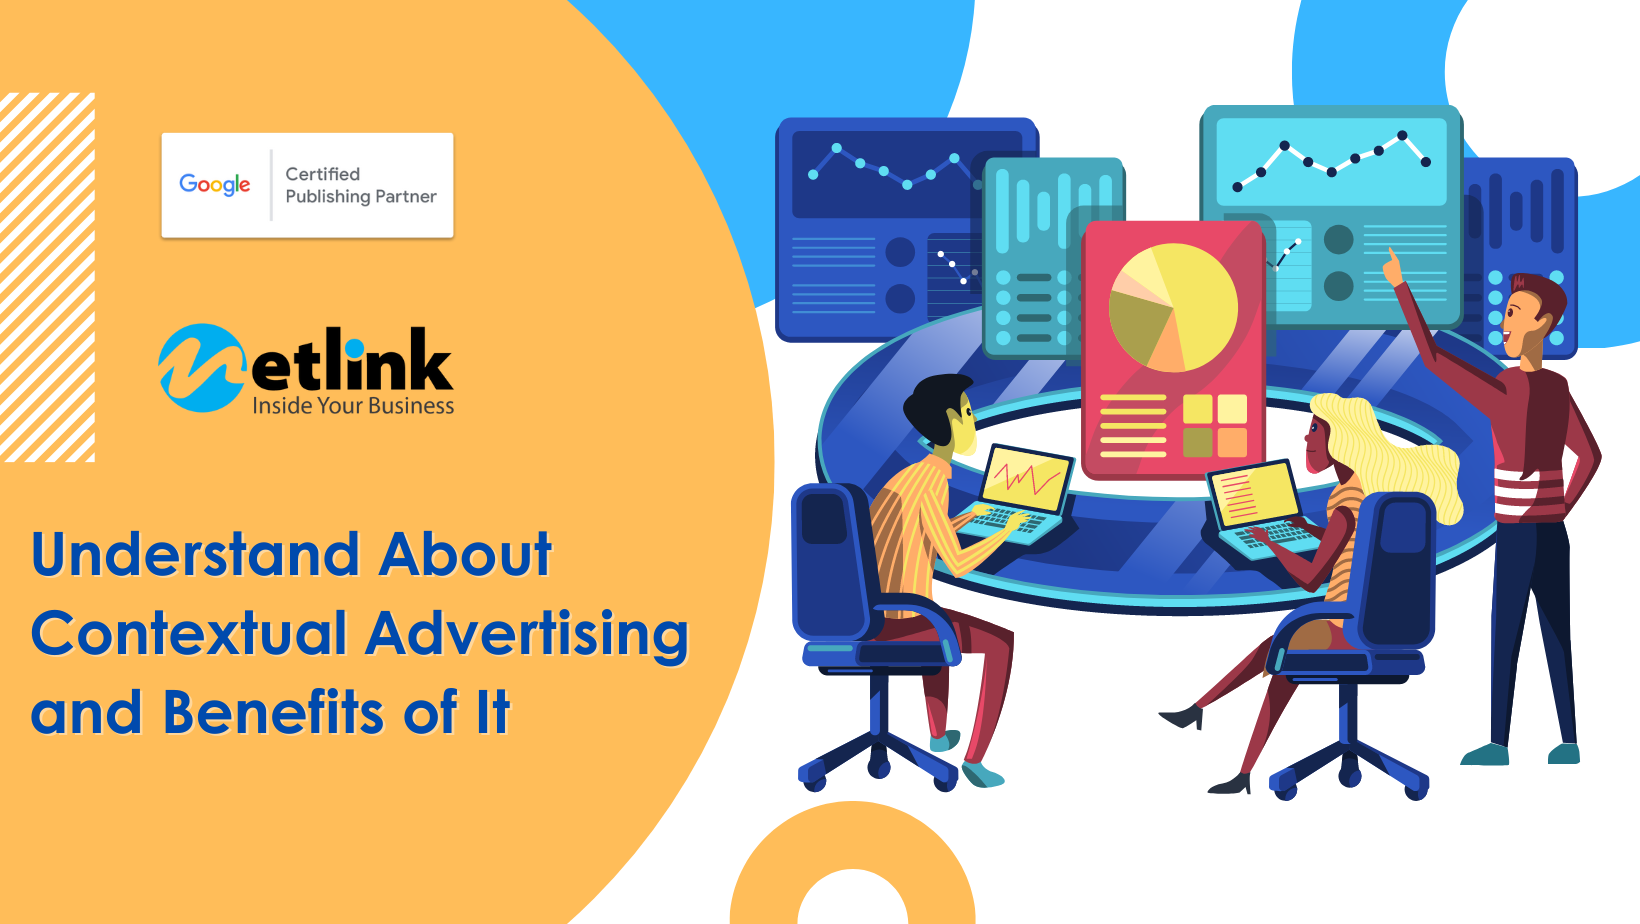 Understand About Contextual Advertising and Benefits of It